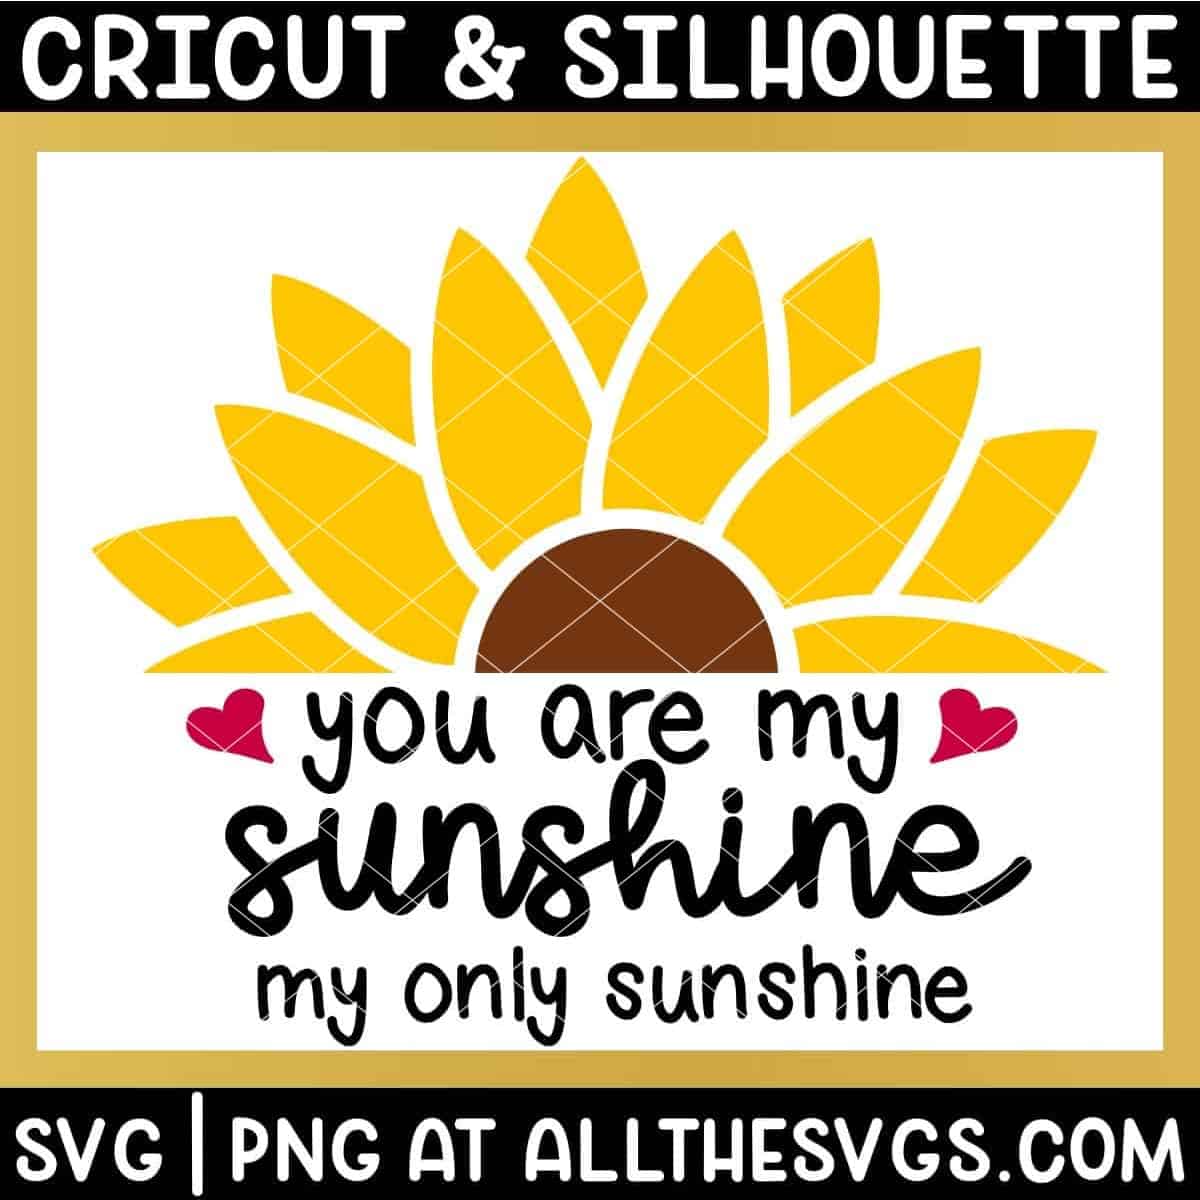 free you are my sunshine quote svg png with half sunflower on top like sun on horizon.